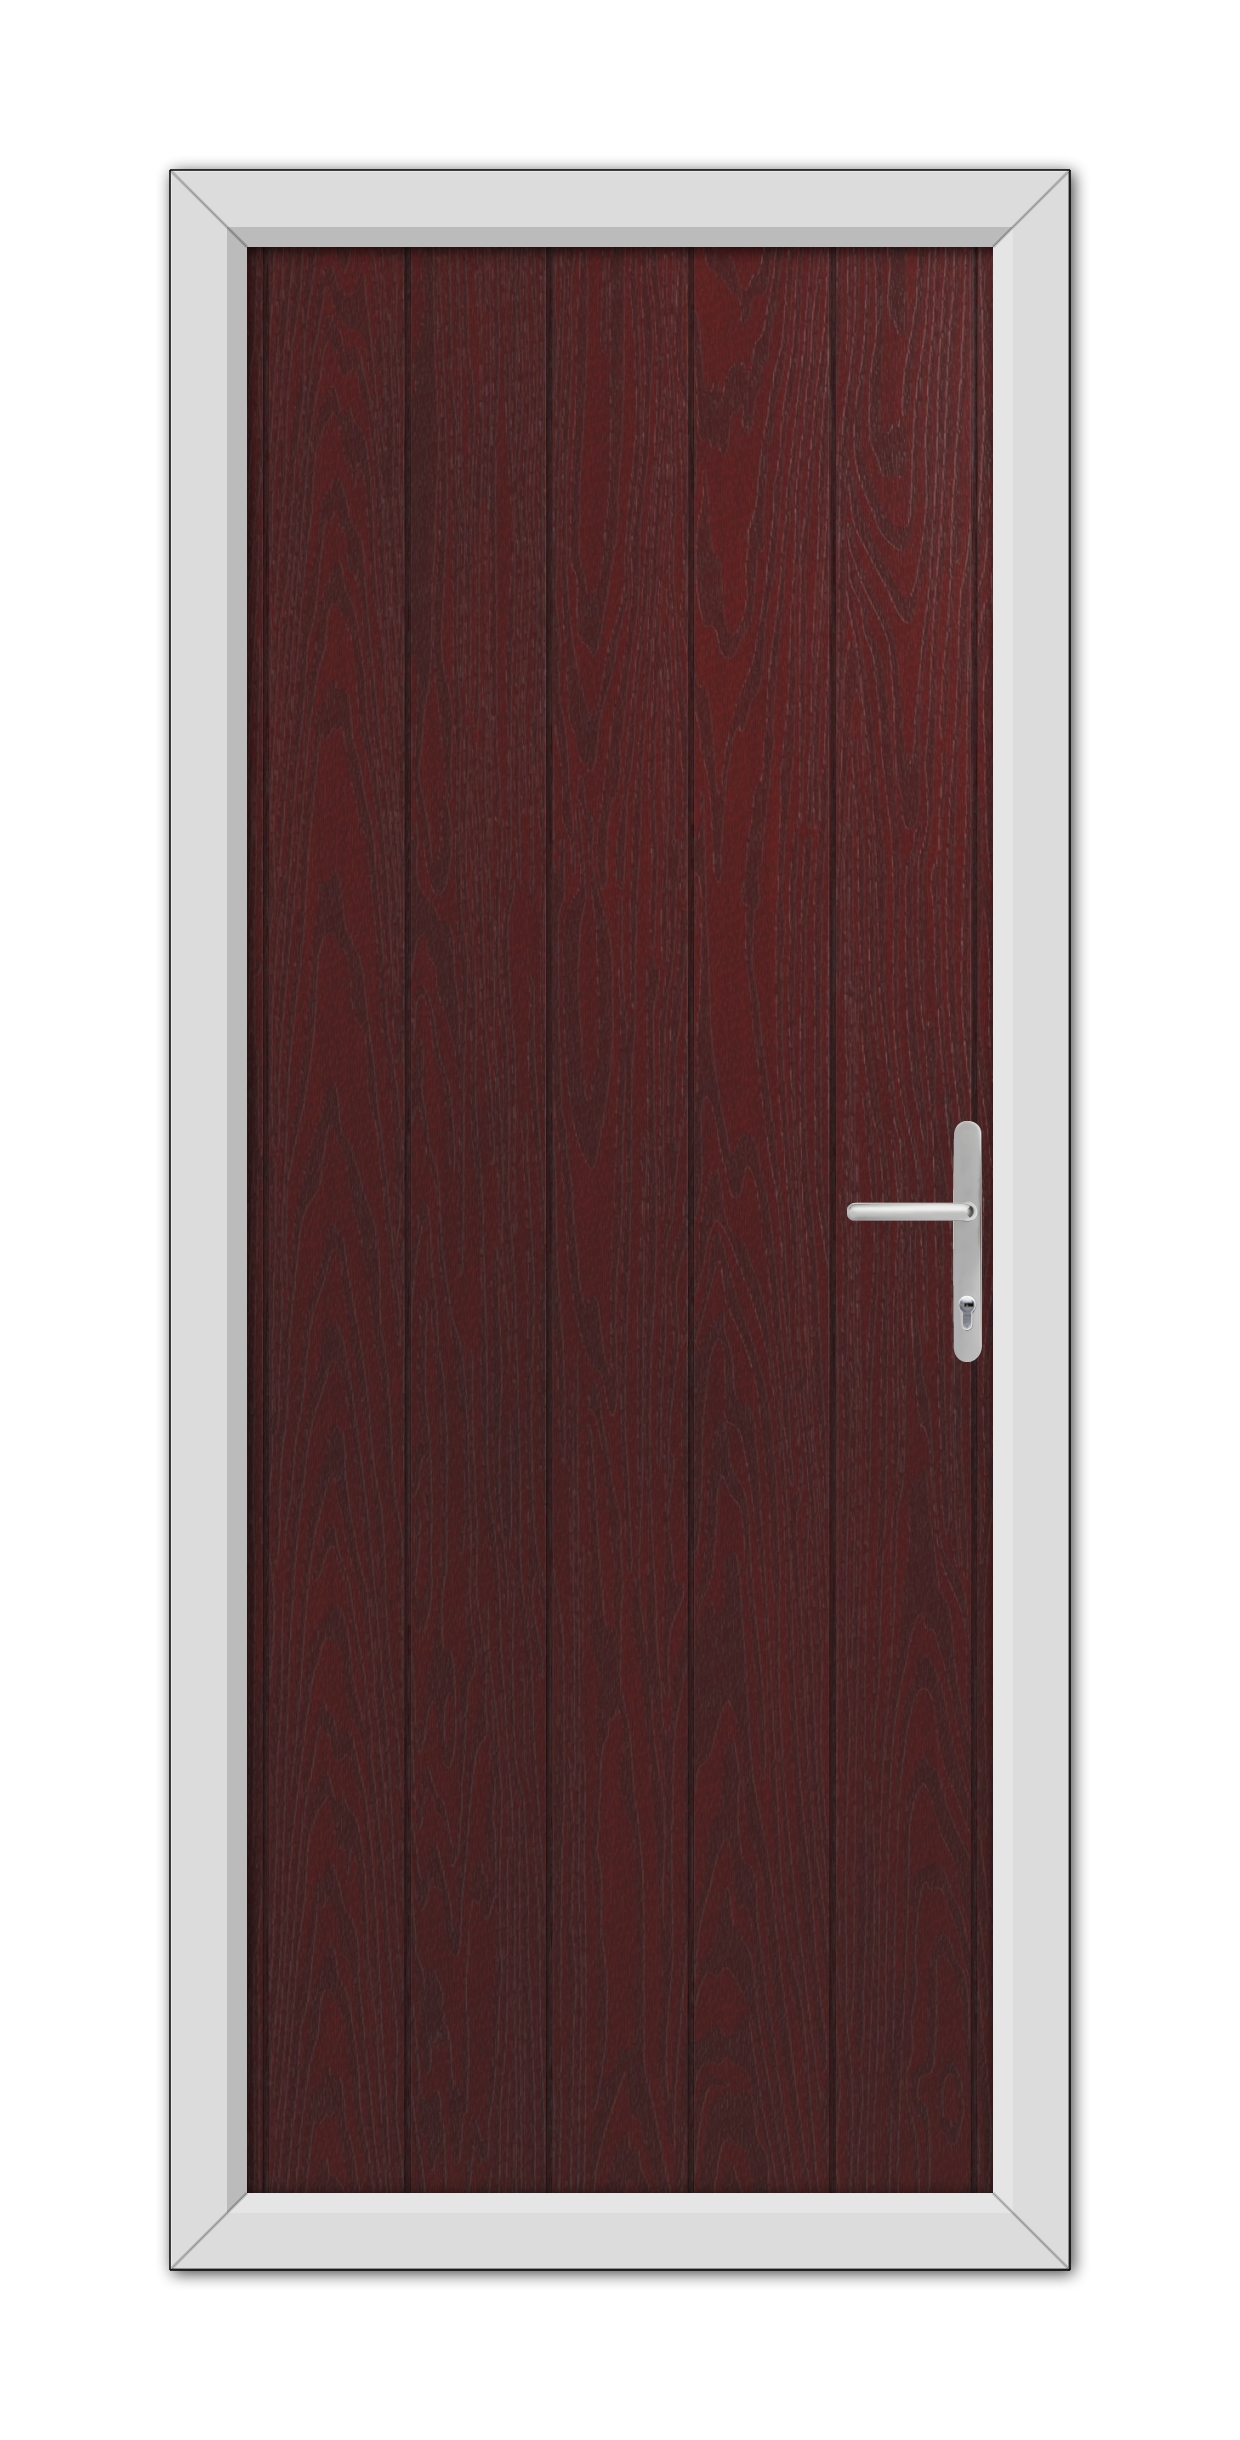 A Rosewood Norfolk Solid Composite Door 48mm Timber Core with a vertical grain texture, framed by a white border, featuring a modern silver handle on the right side.